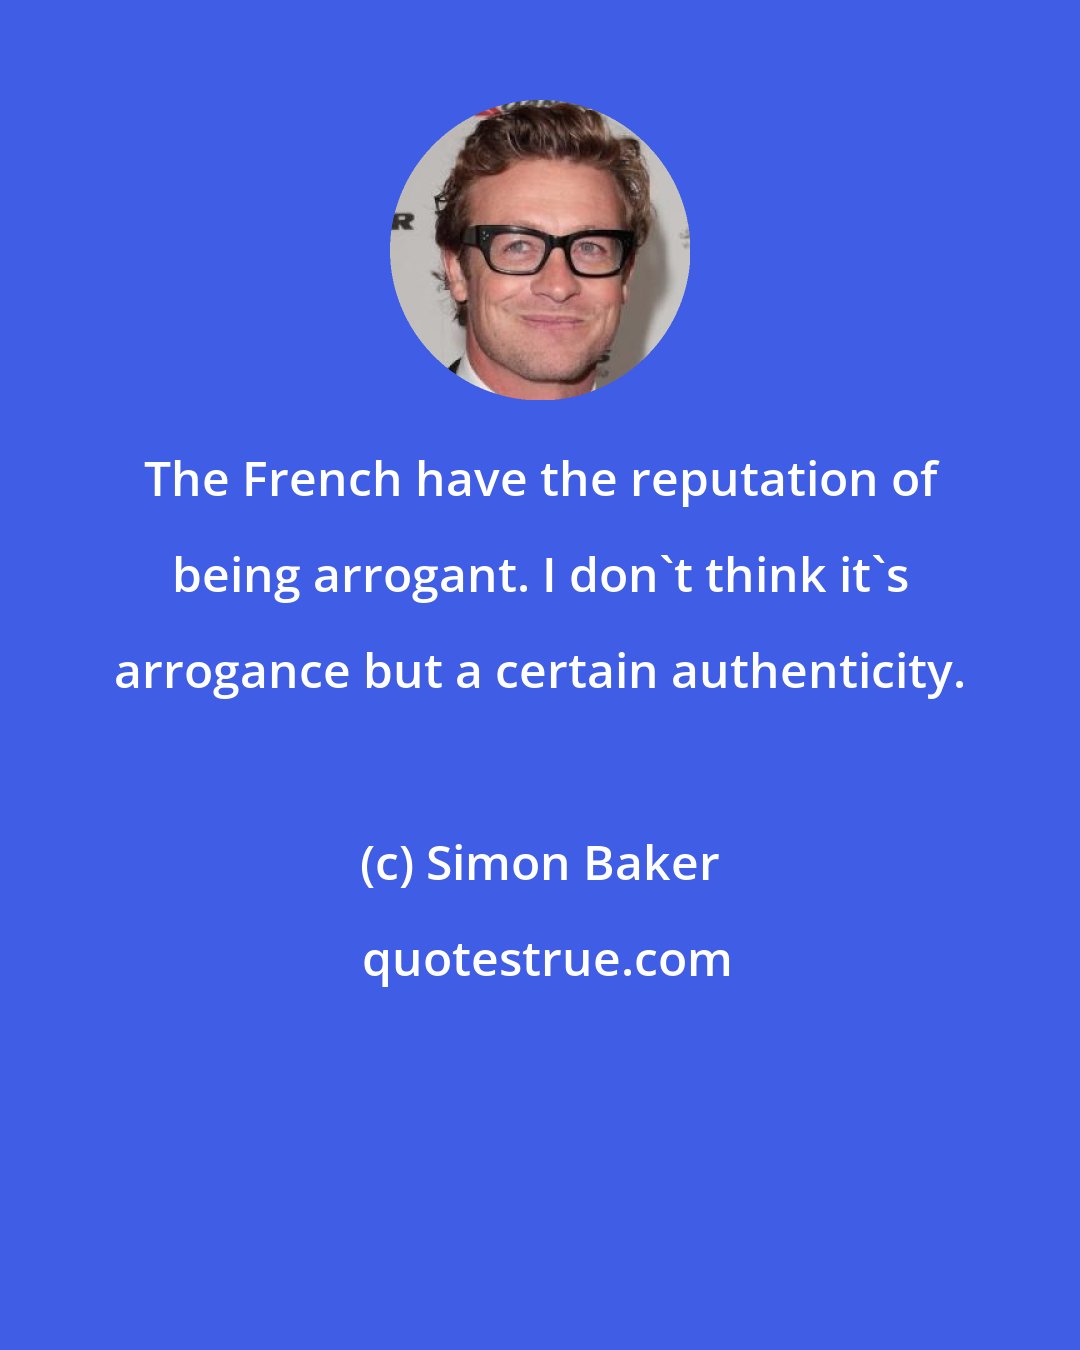 Simon Baker: The French have the reputation of being arrogant. I don't think it's arrogance but a certain authenticity.